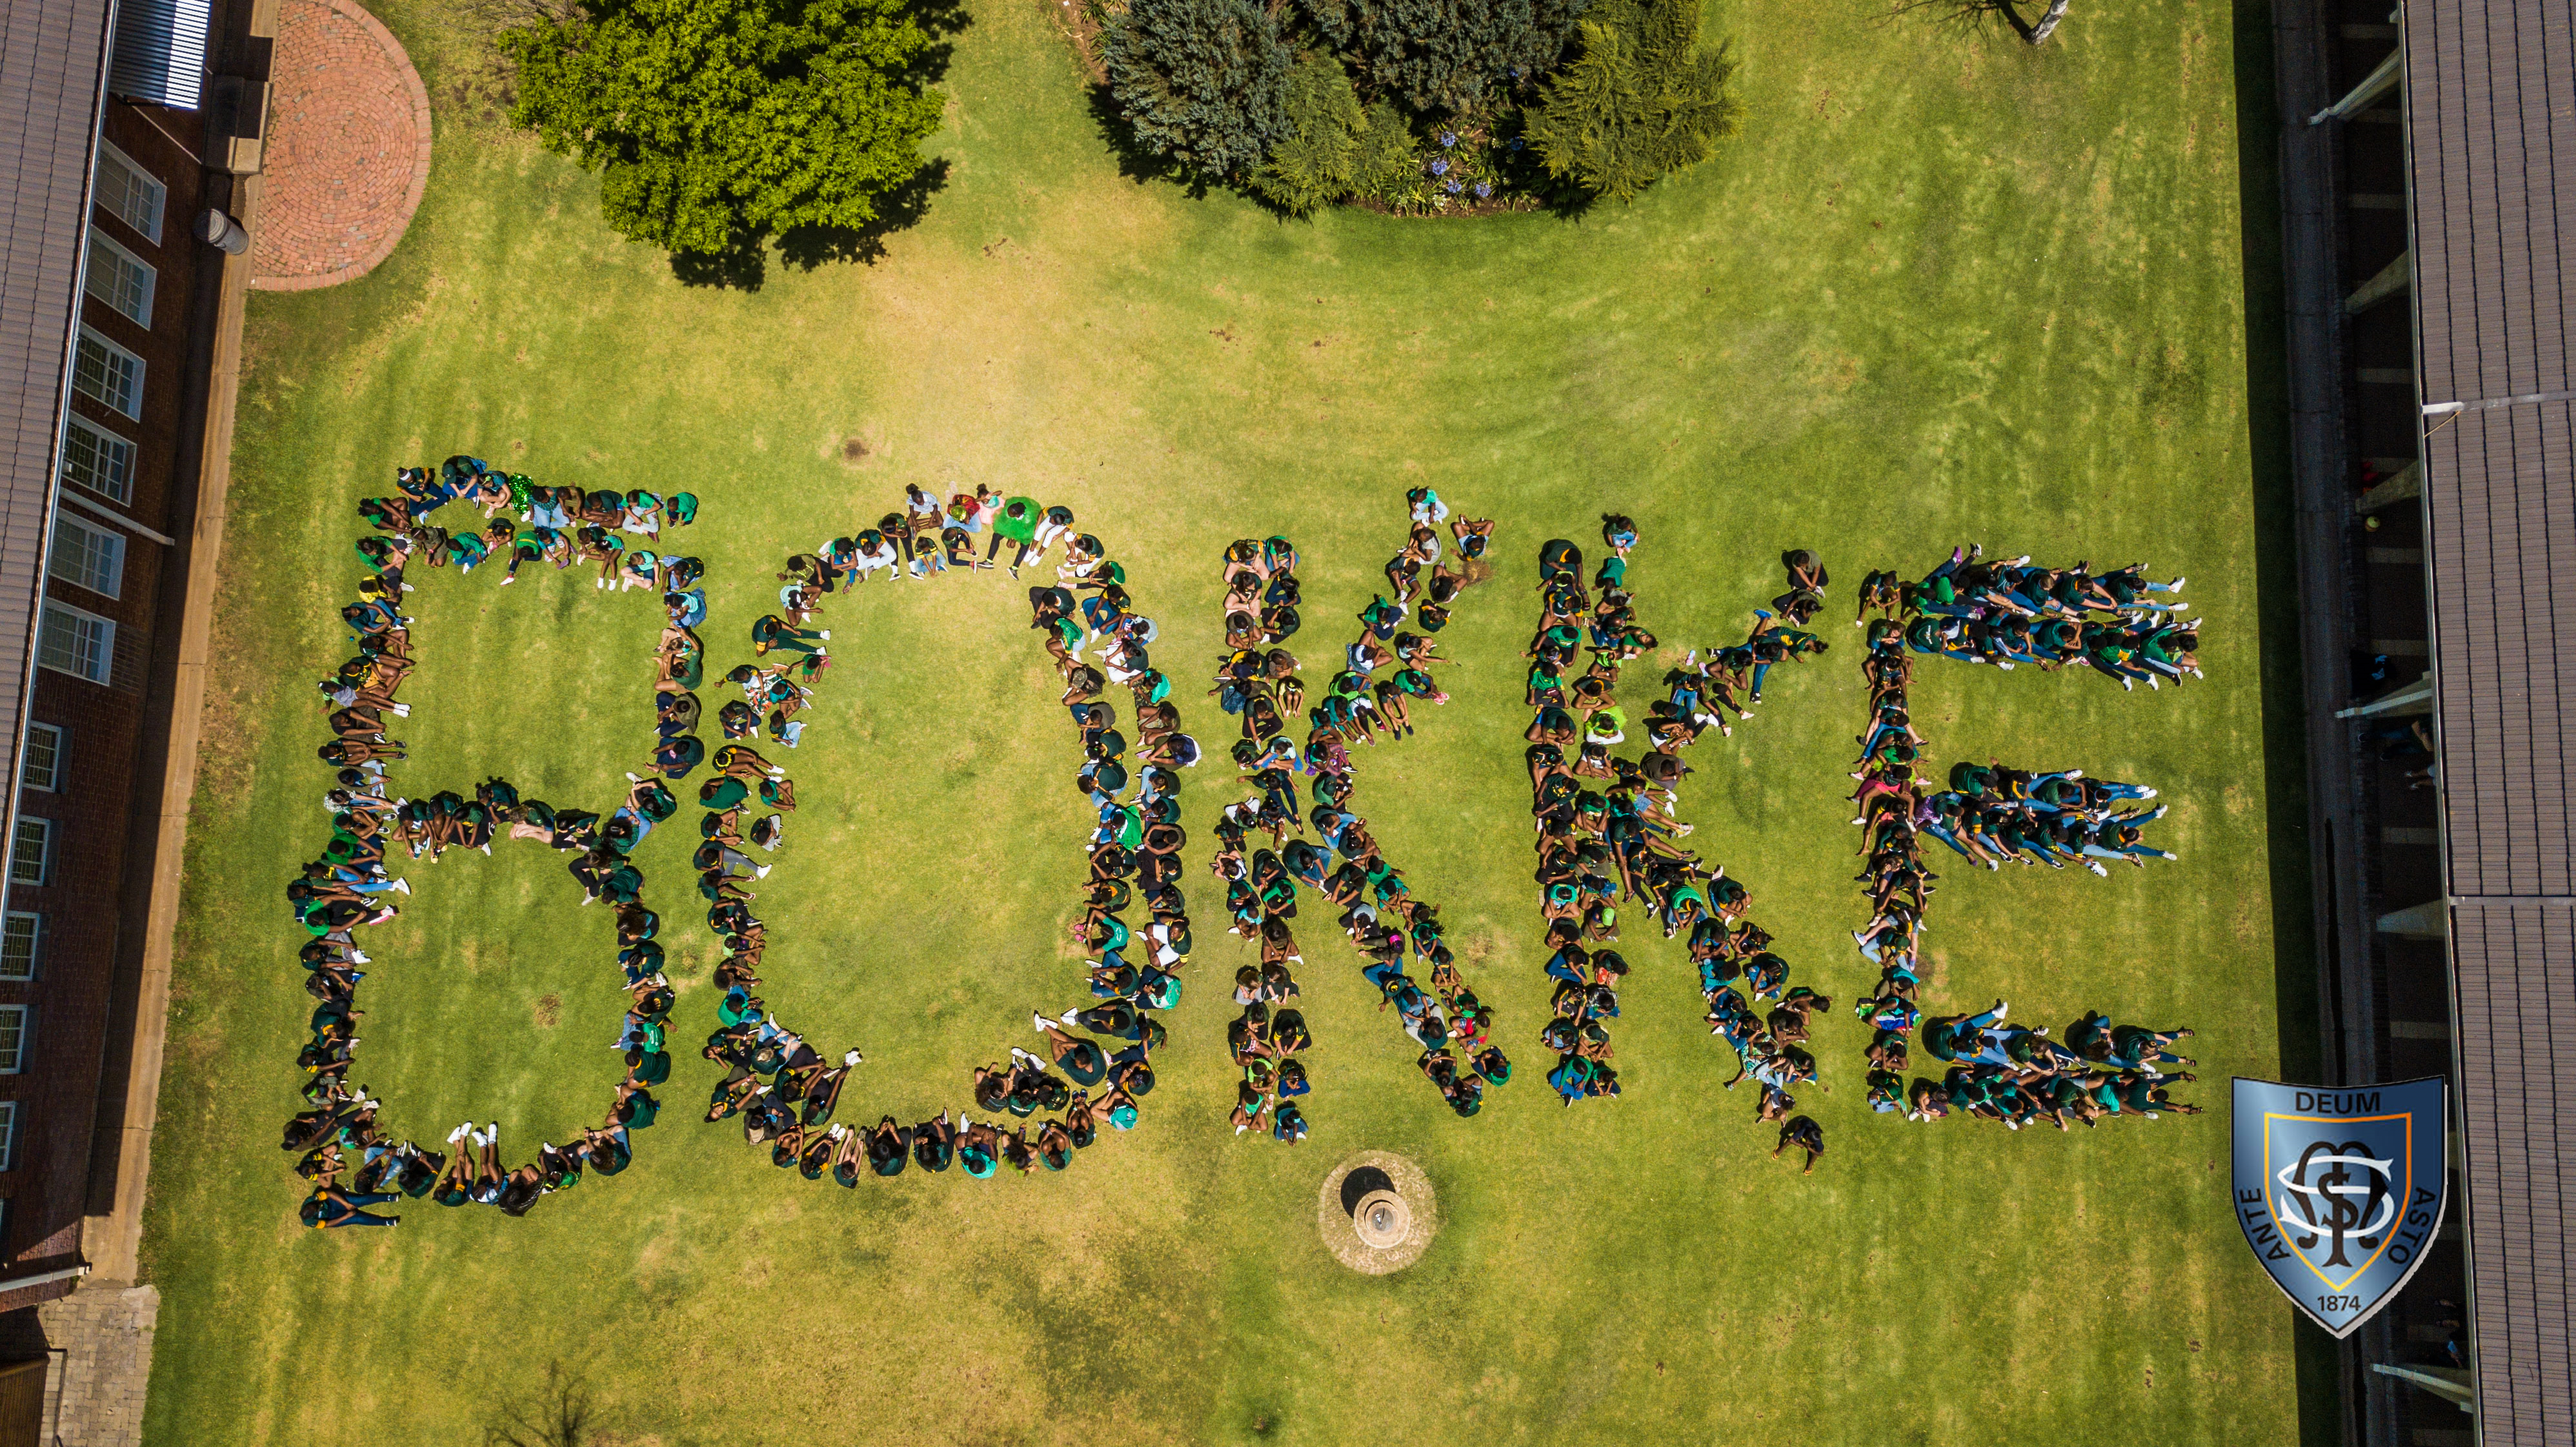 St Michael’s support the Bokke